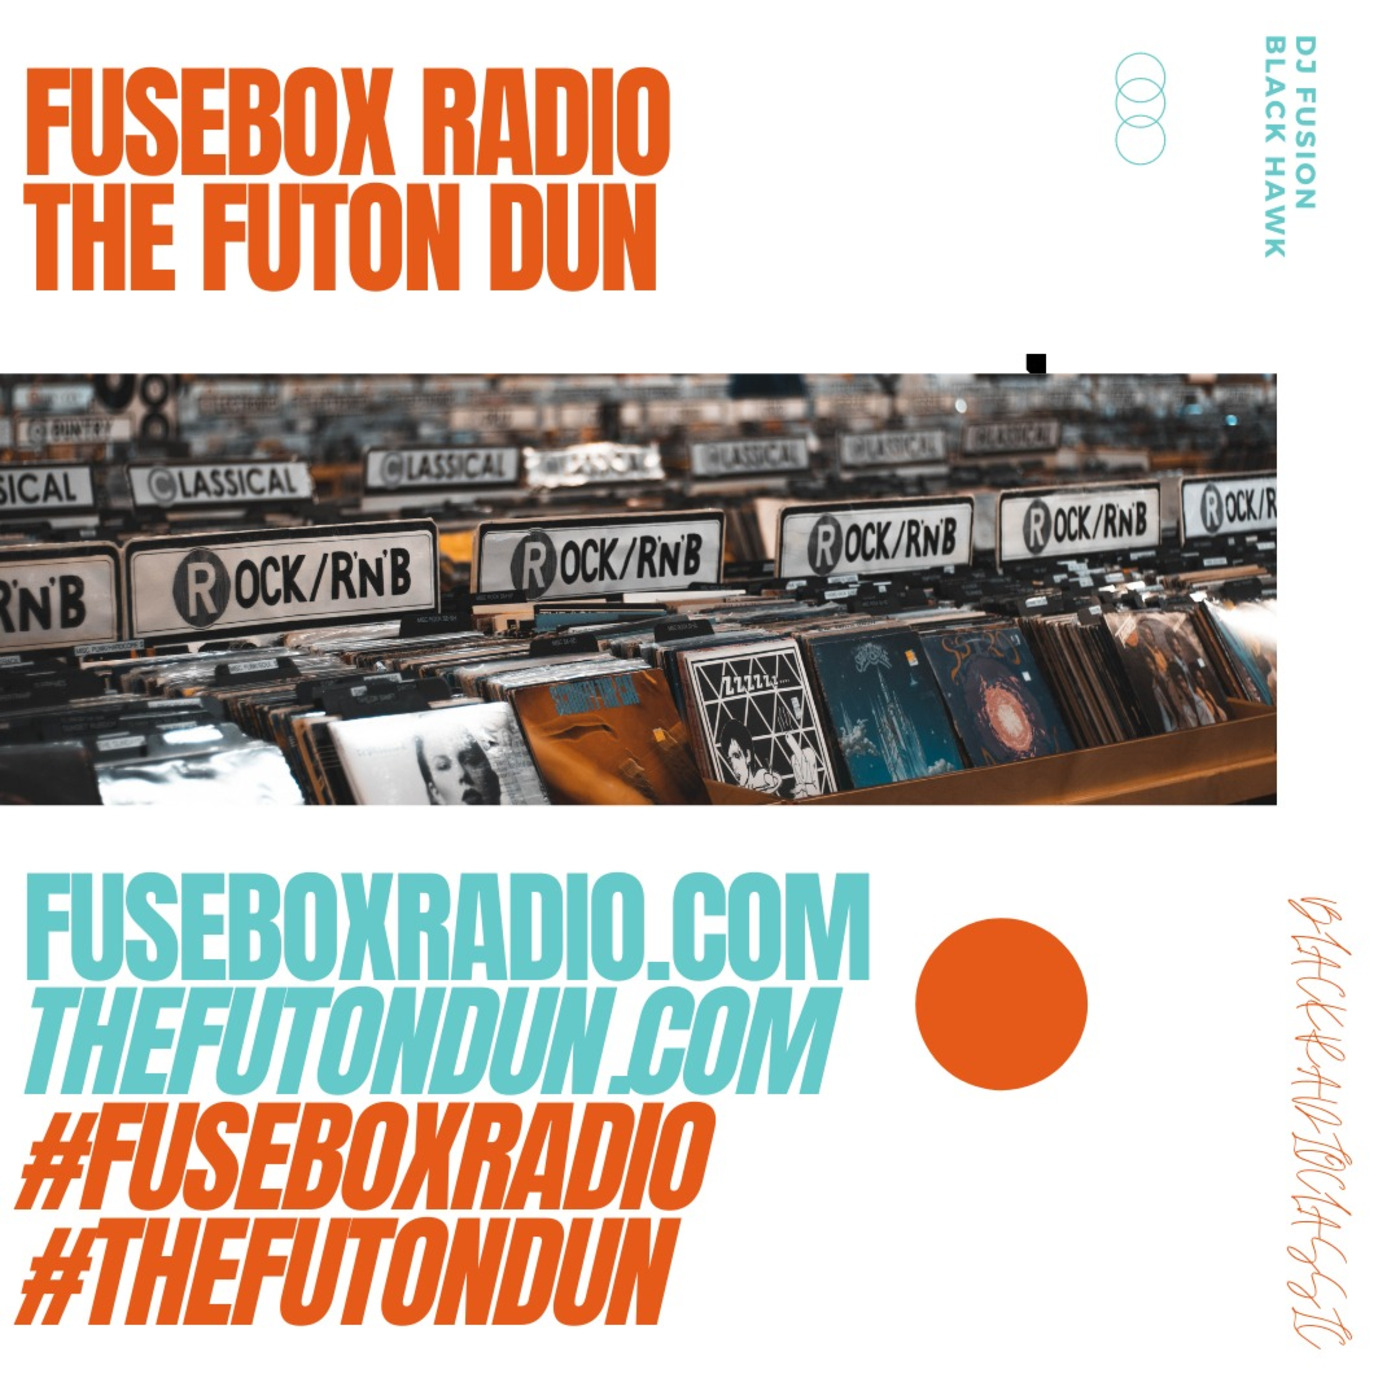 Episode 477:  FuseBox Radio #629: Mini-Commentary Episode - A Buffet Of Quick Reflections on 2020, Popular Culture and More...